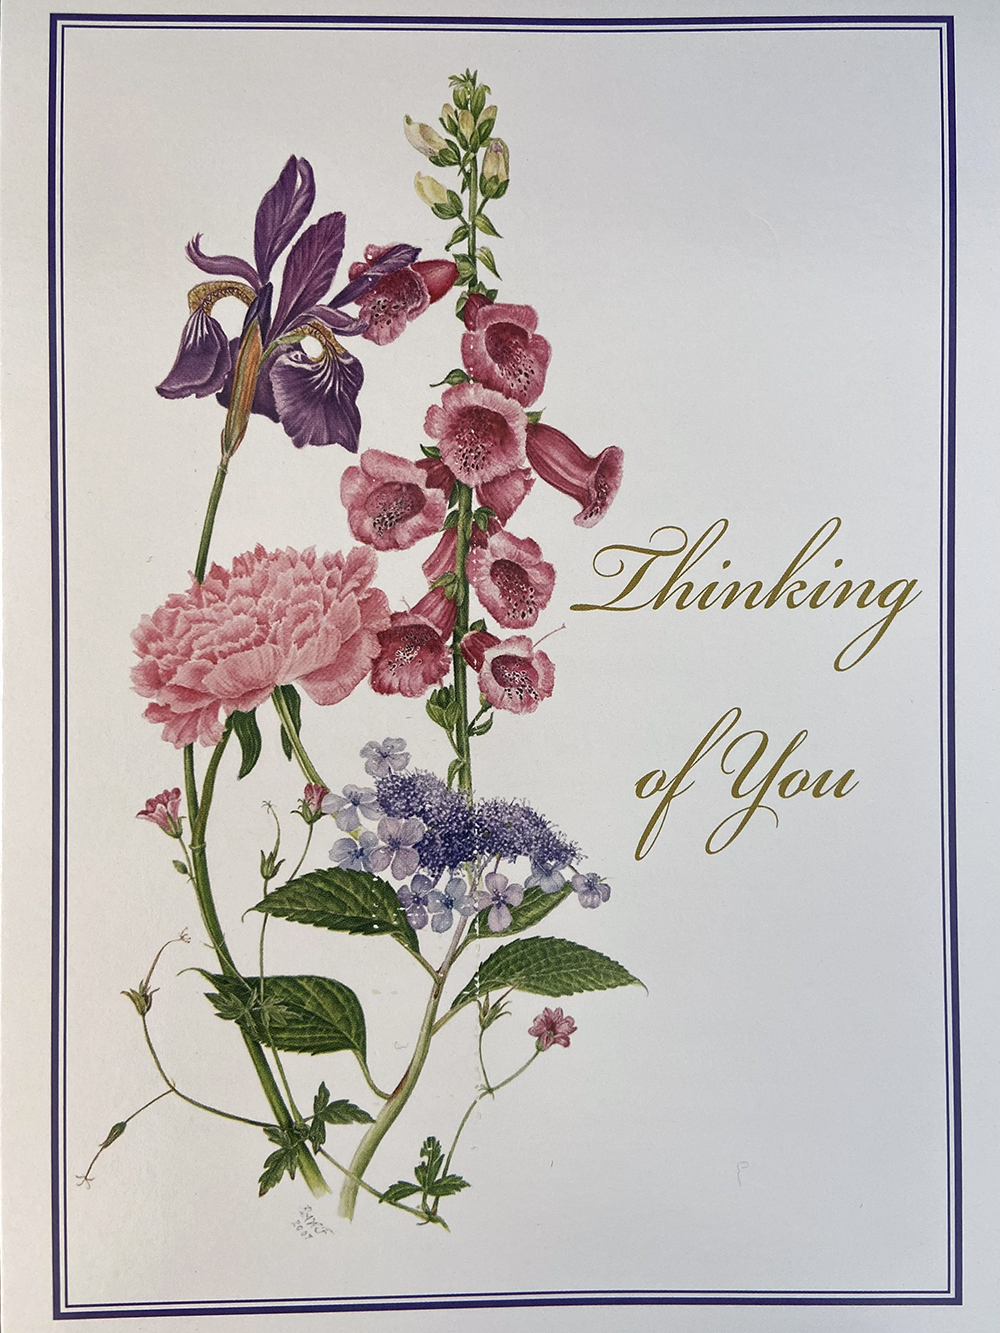 Thinking of You Mass Card